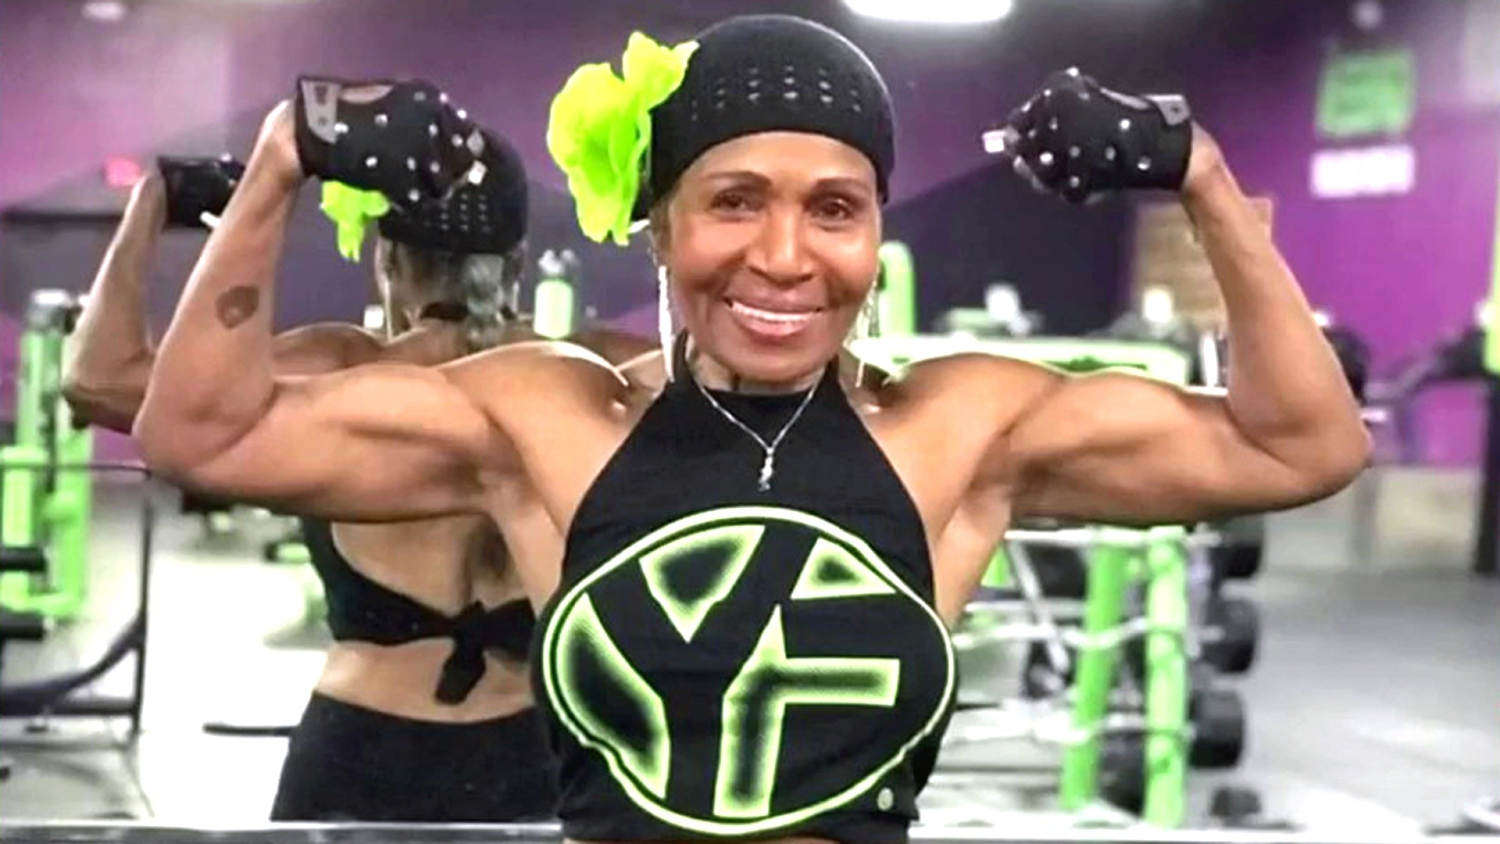 Meet 80-year-Old Female Bodybuilder Who Started Working Out at 56